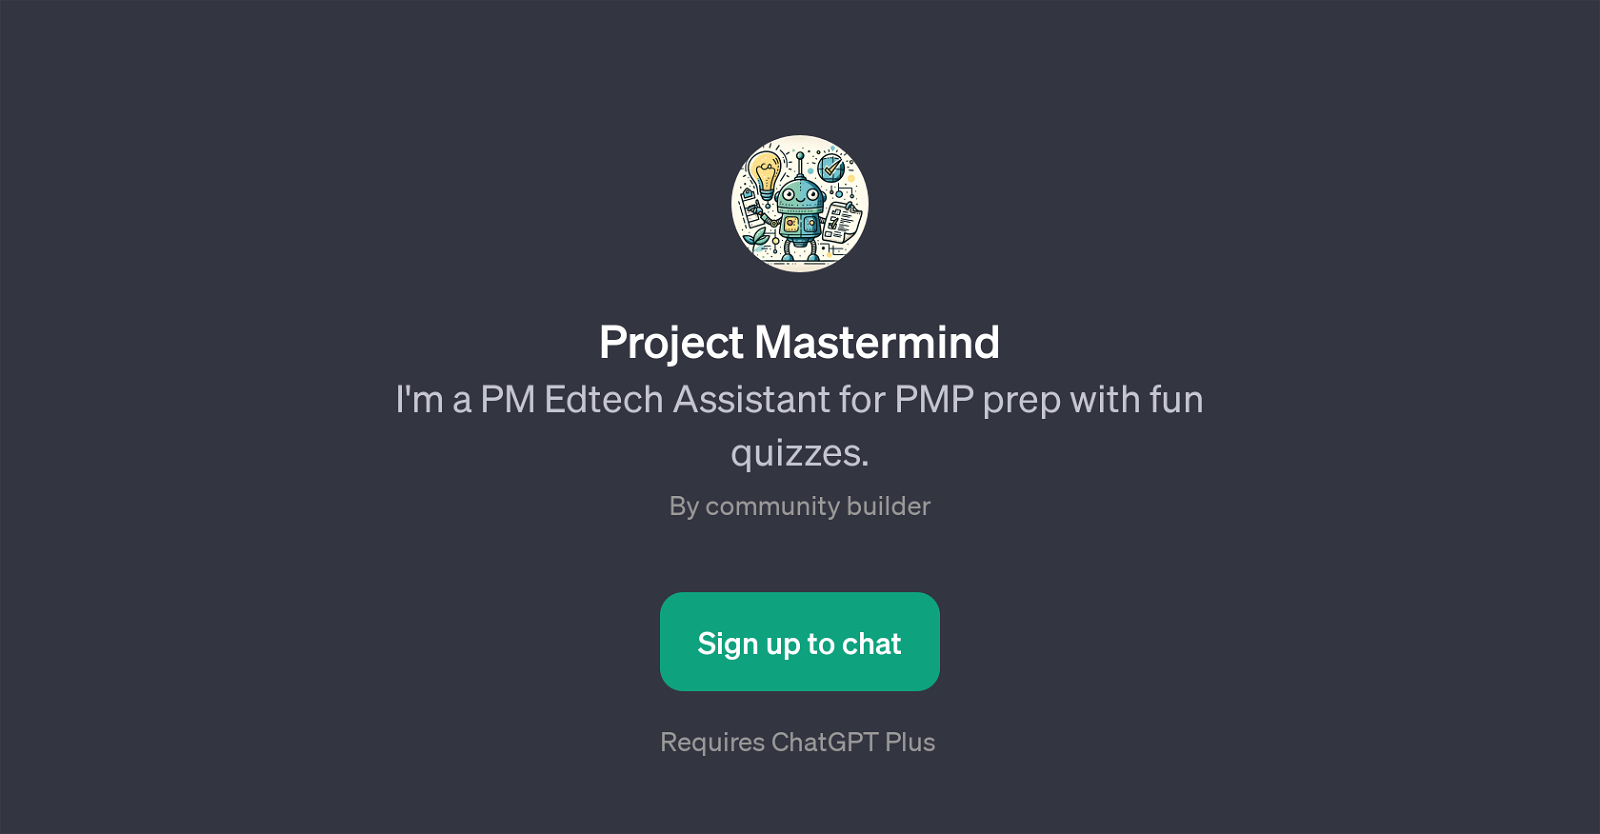 Project Mastermind website